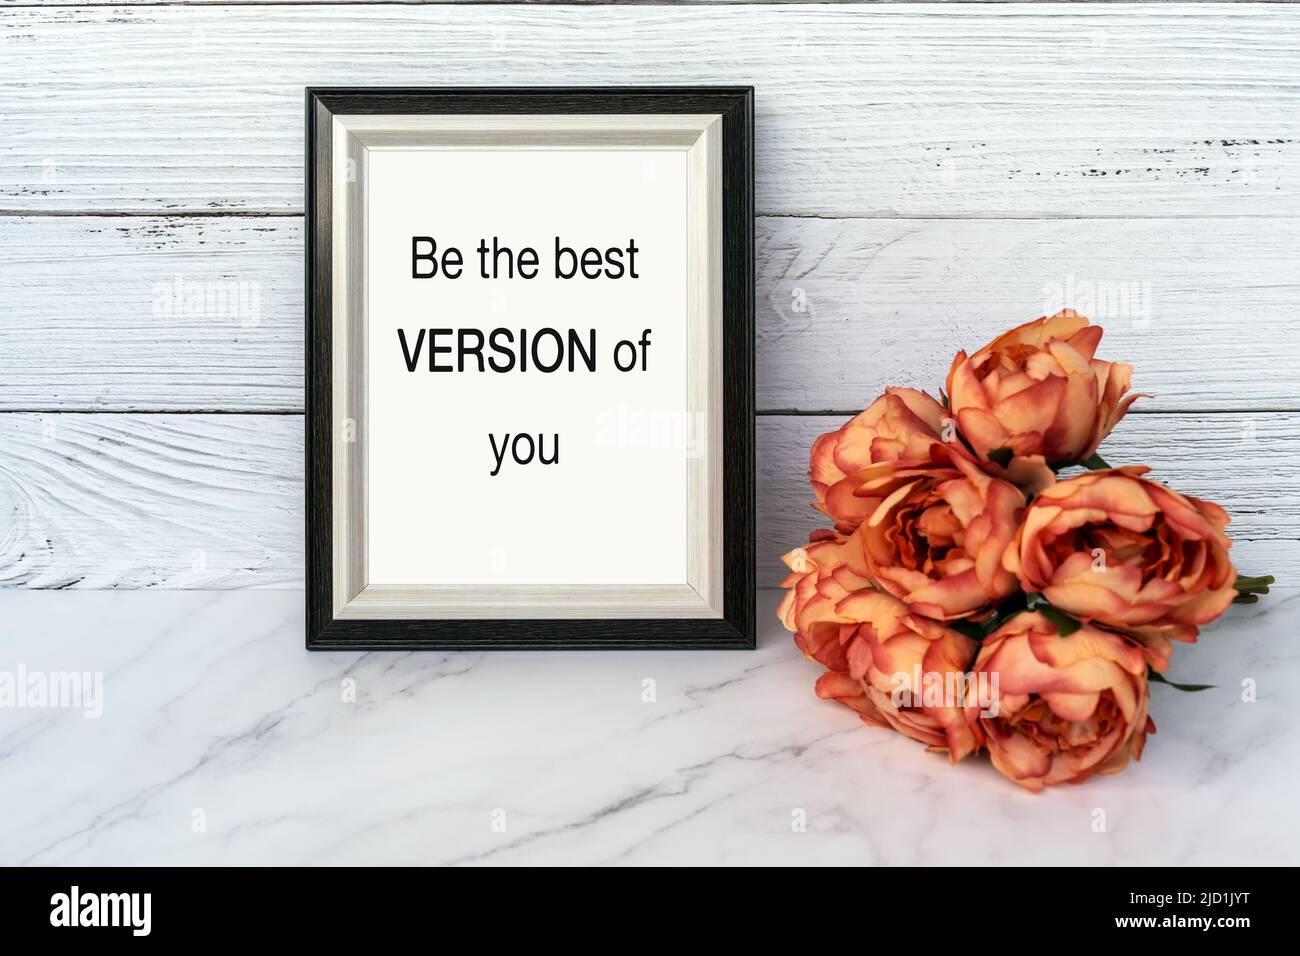 Life motivational quote - Be the best version of you Stock Photo